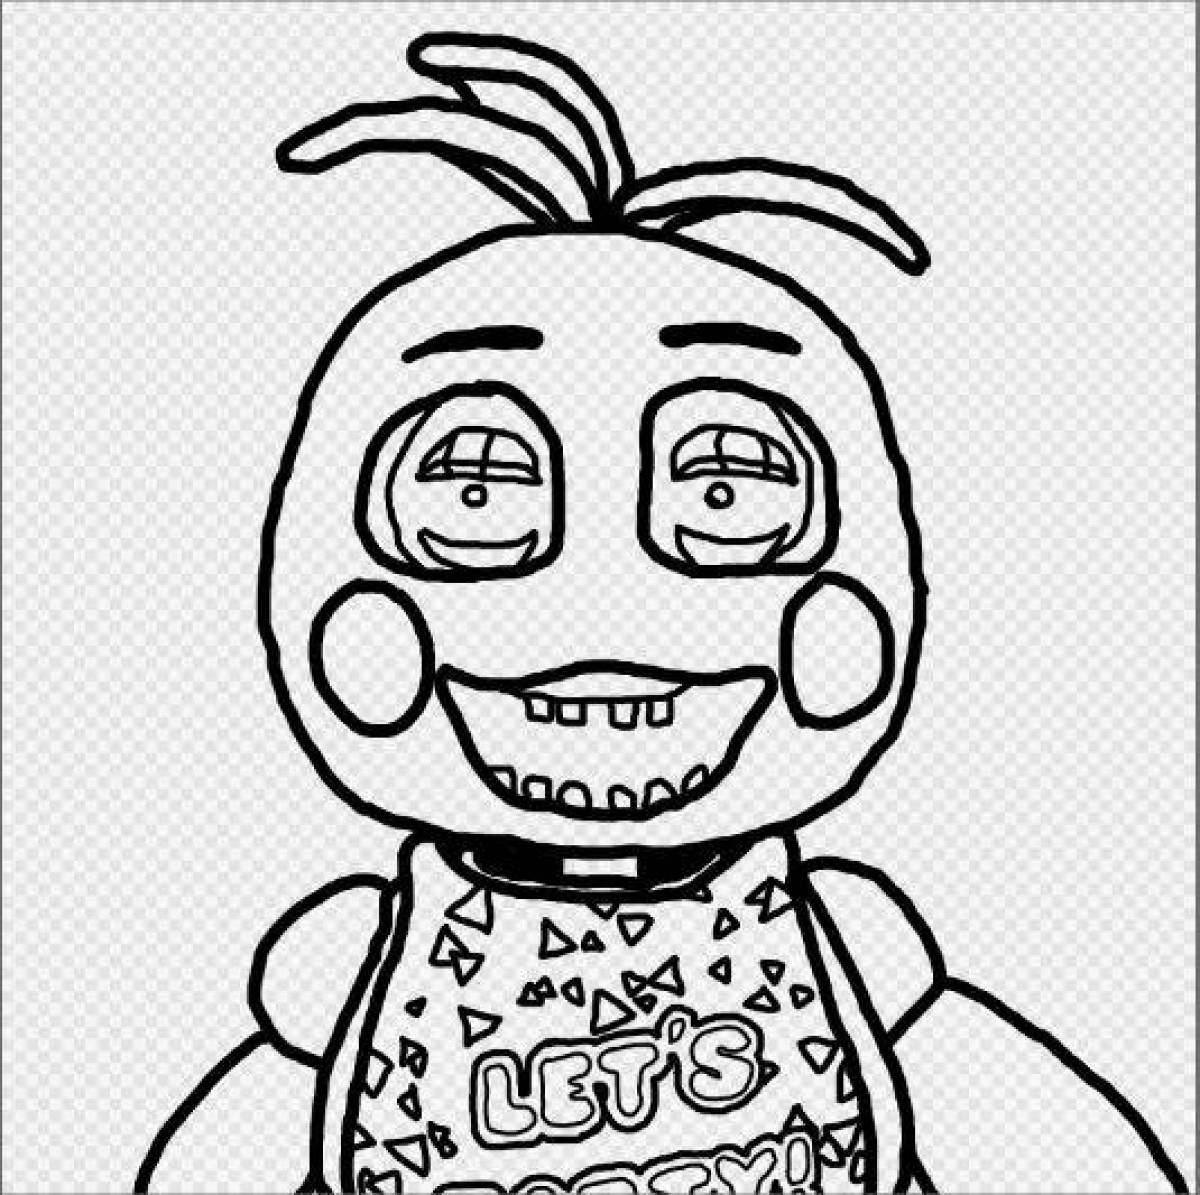 Chica's sweet animatronic coloring book